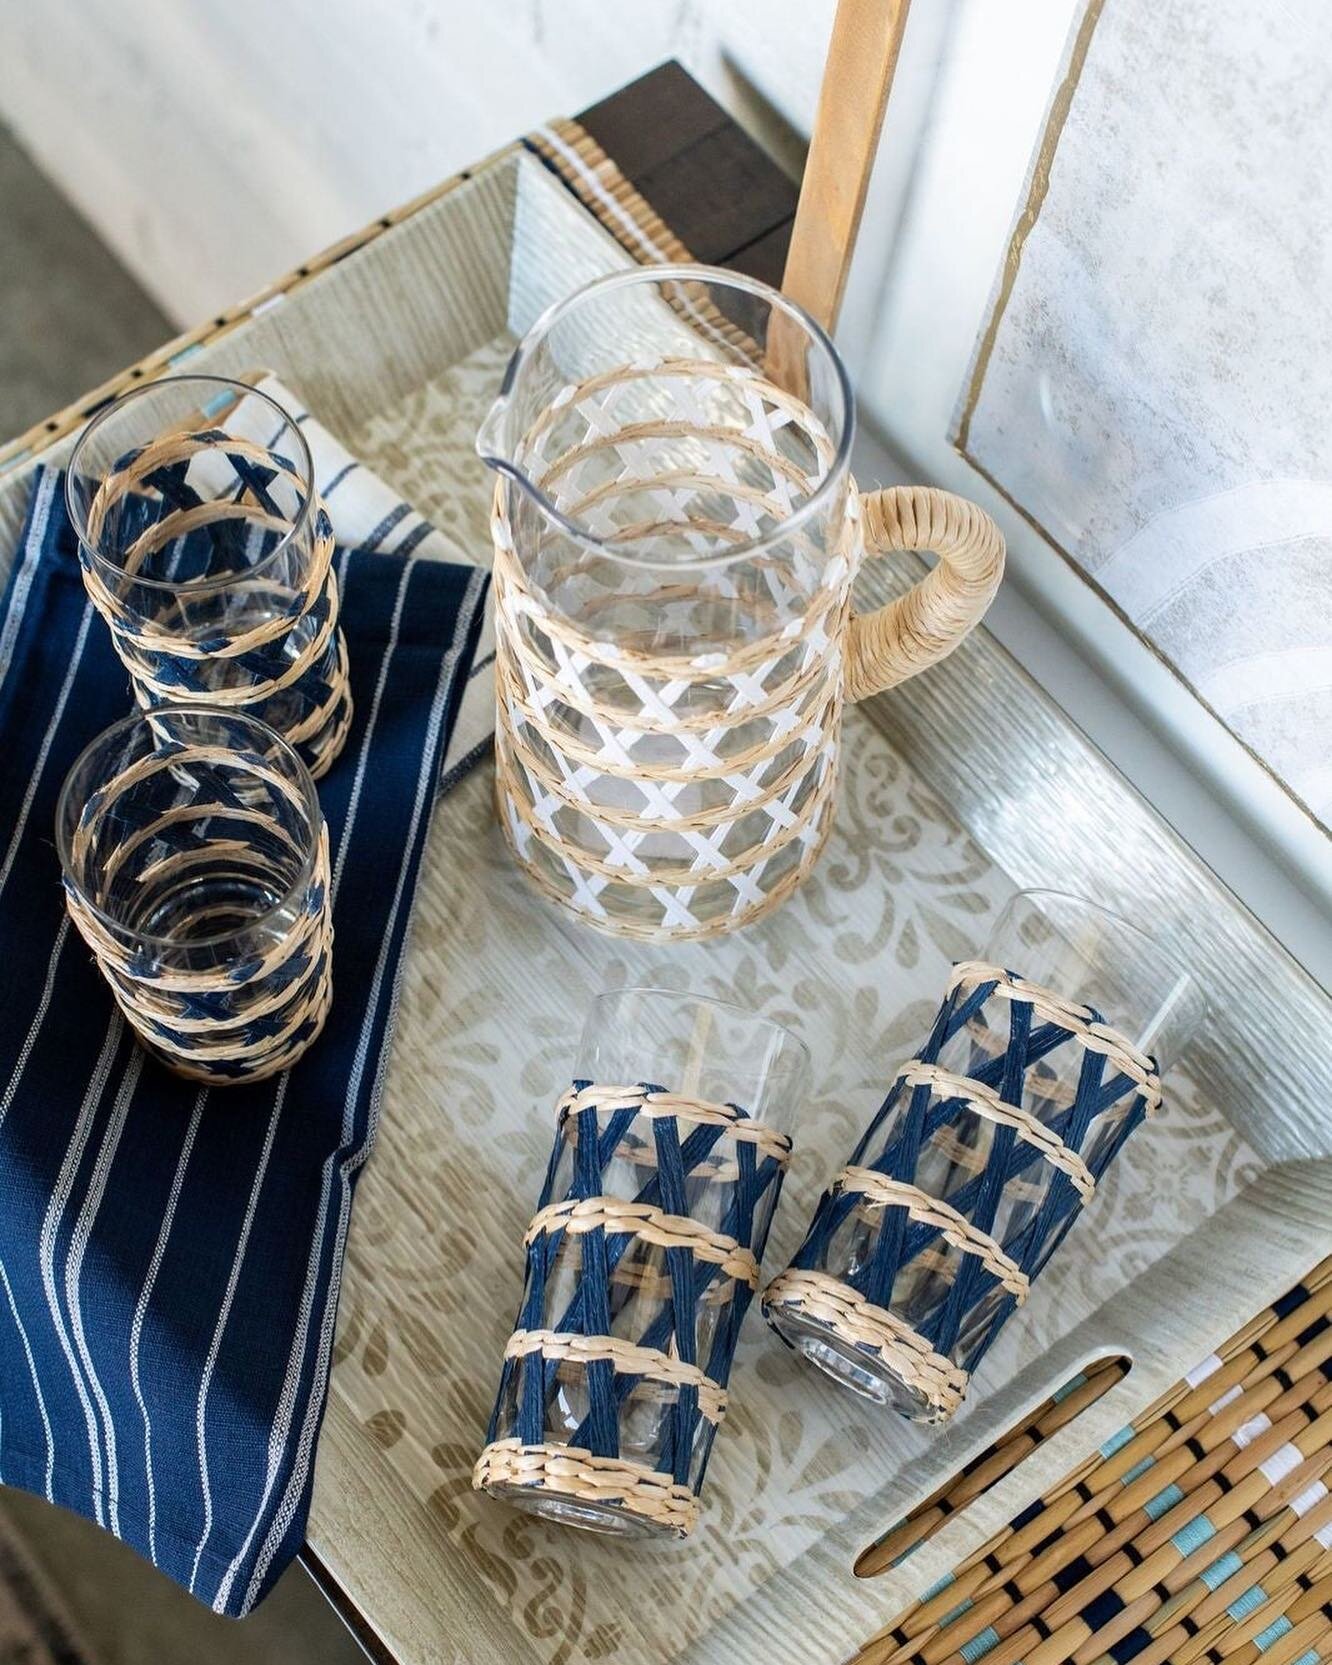 A cold pour of your favorite drink deserves the perfect glass. 💕 These seagrass tumblers are back and available in blue and white. Tag a friend who needs to see these! 👇	
.
#kirklandsfinds #kirklandshappiness #bringhappinesshome #outdoordecor #outd